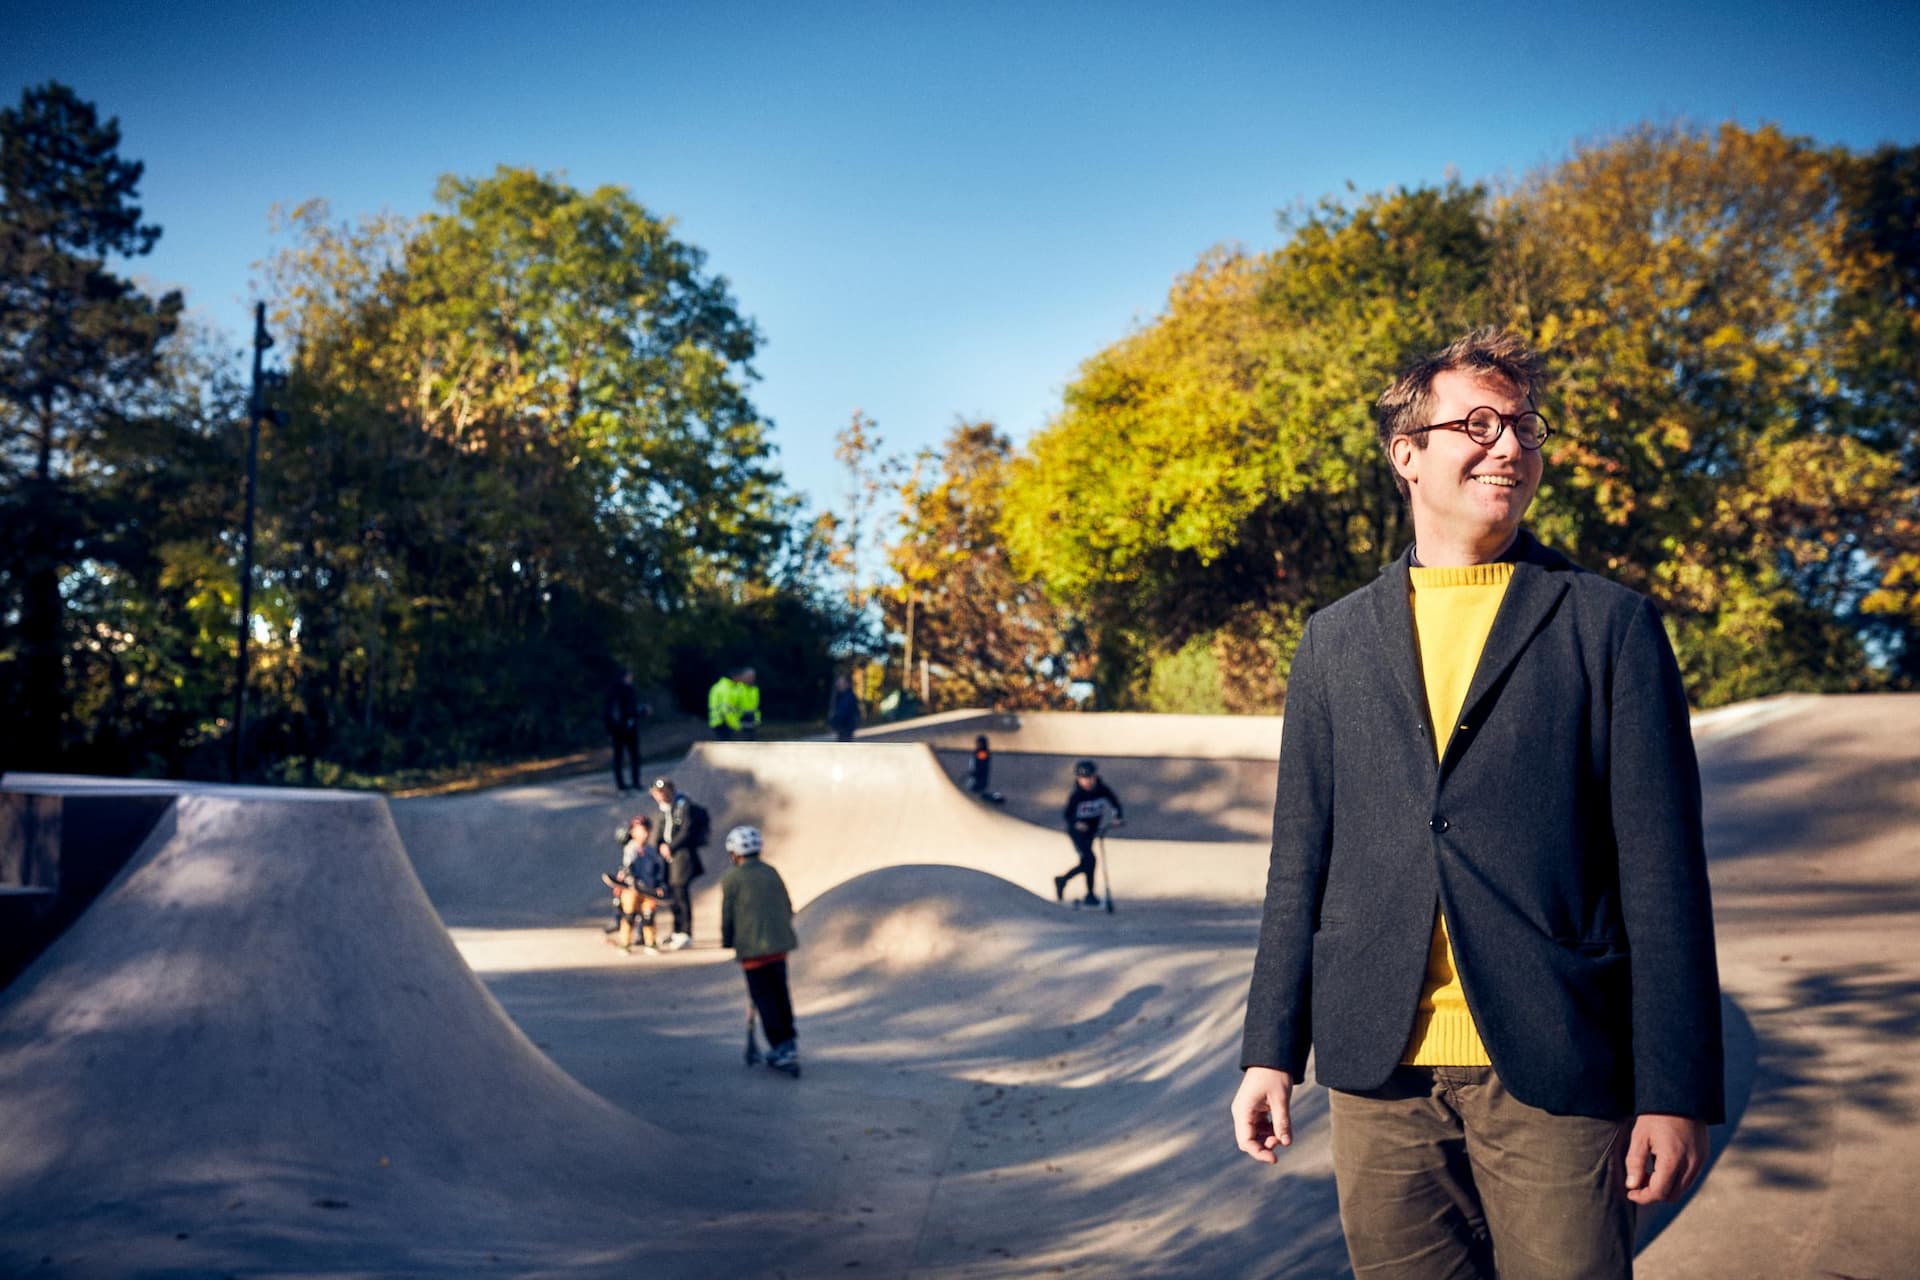 Man with a skateboard park in the background